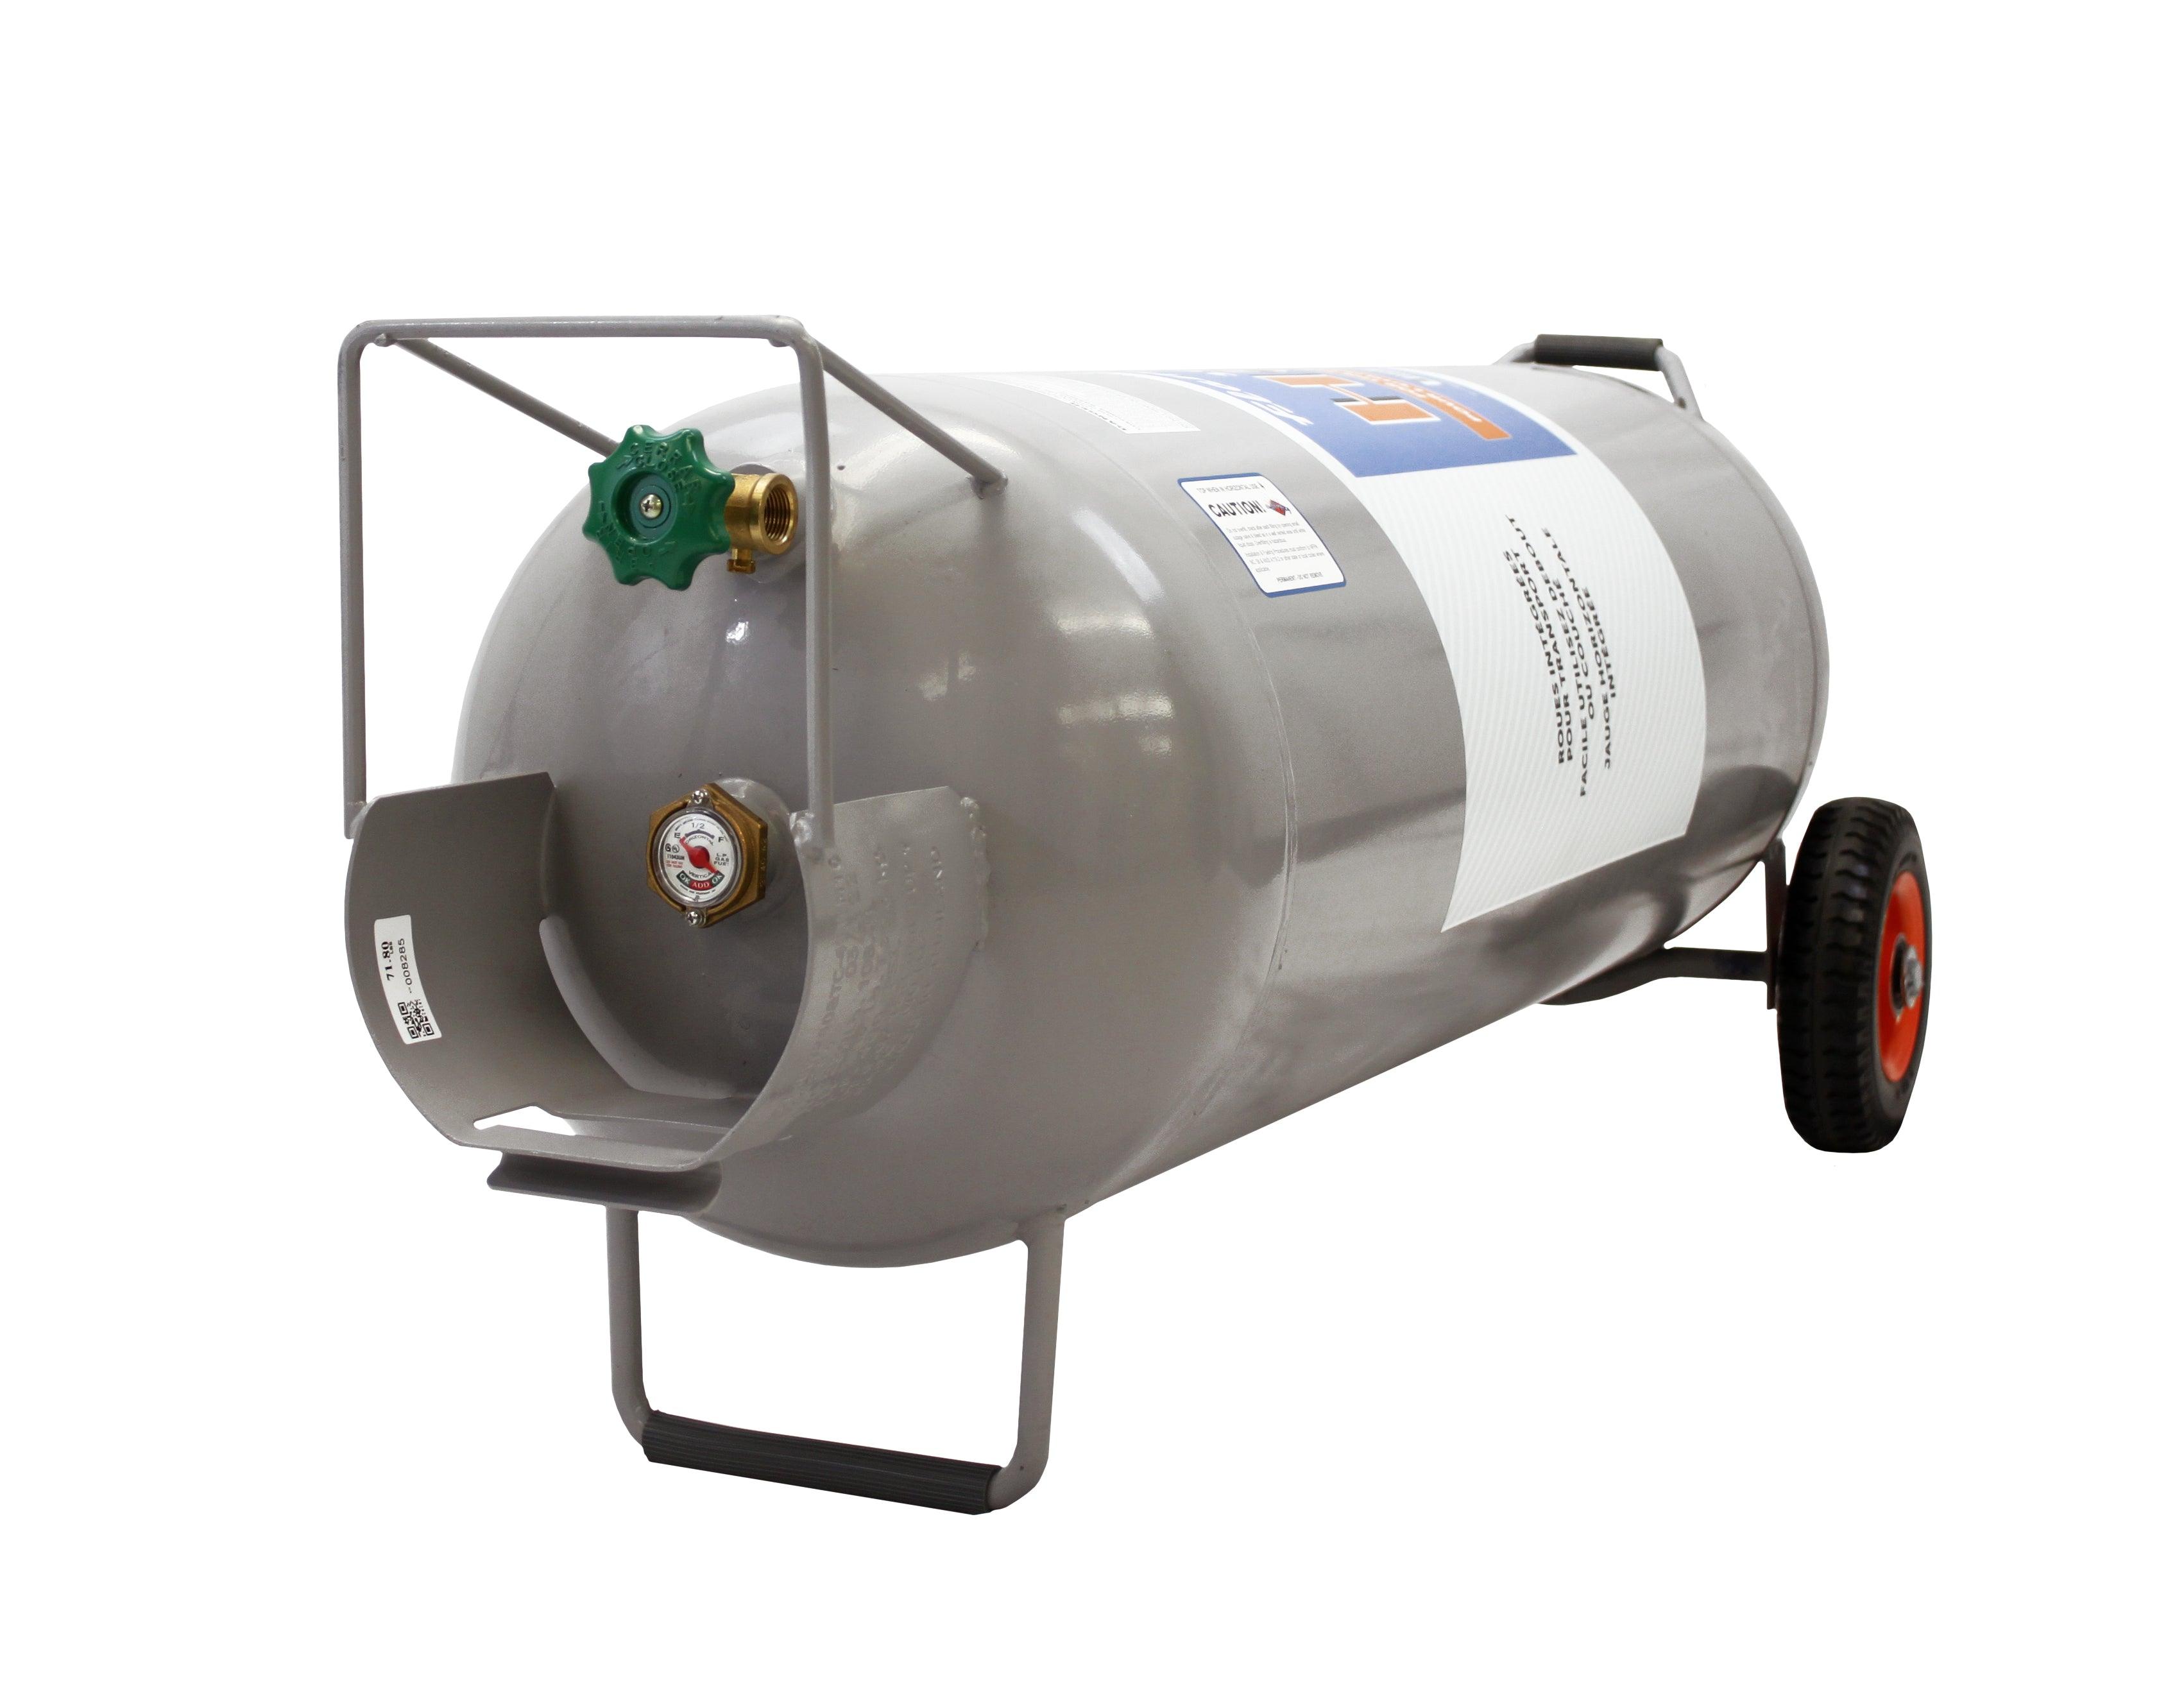 Flame King 100lb Horizontal & Vertical Propane Cylinder with POL & Wheels - Flame King